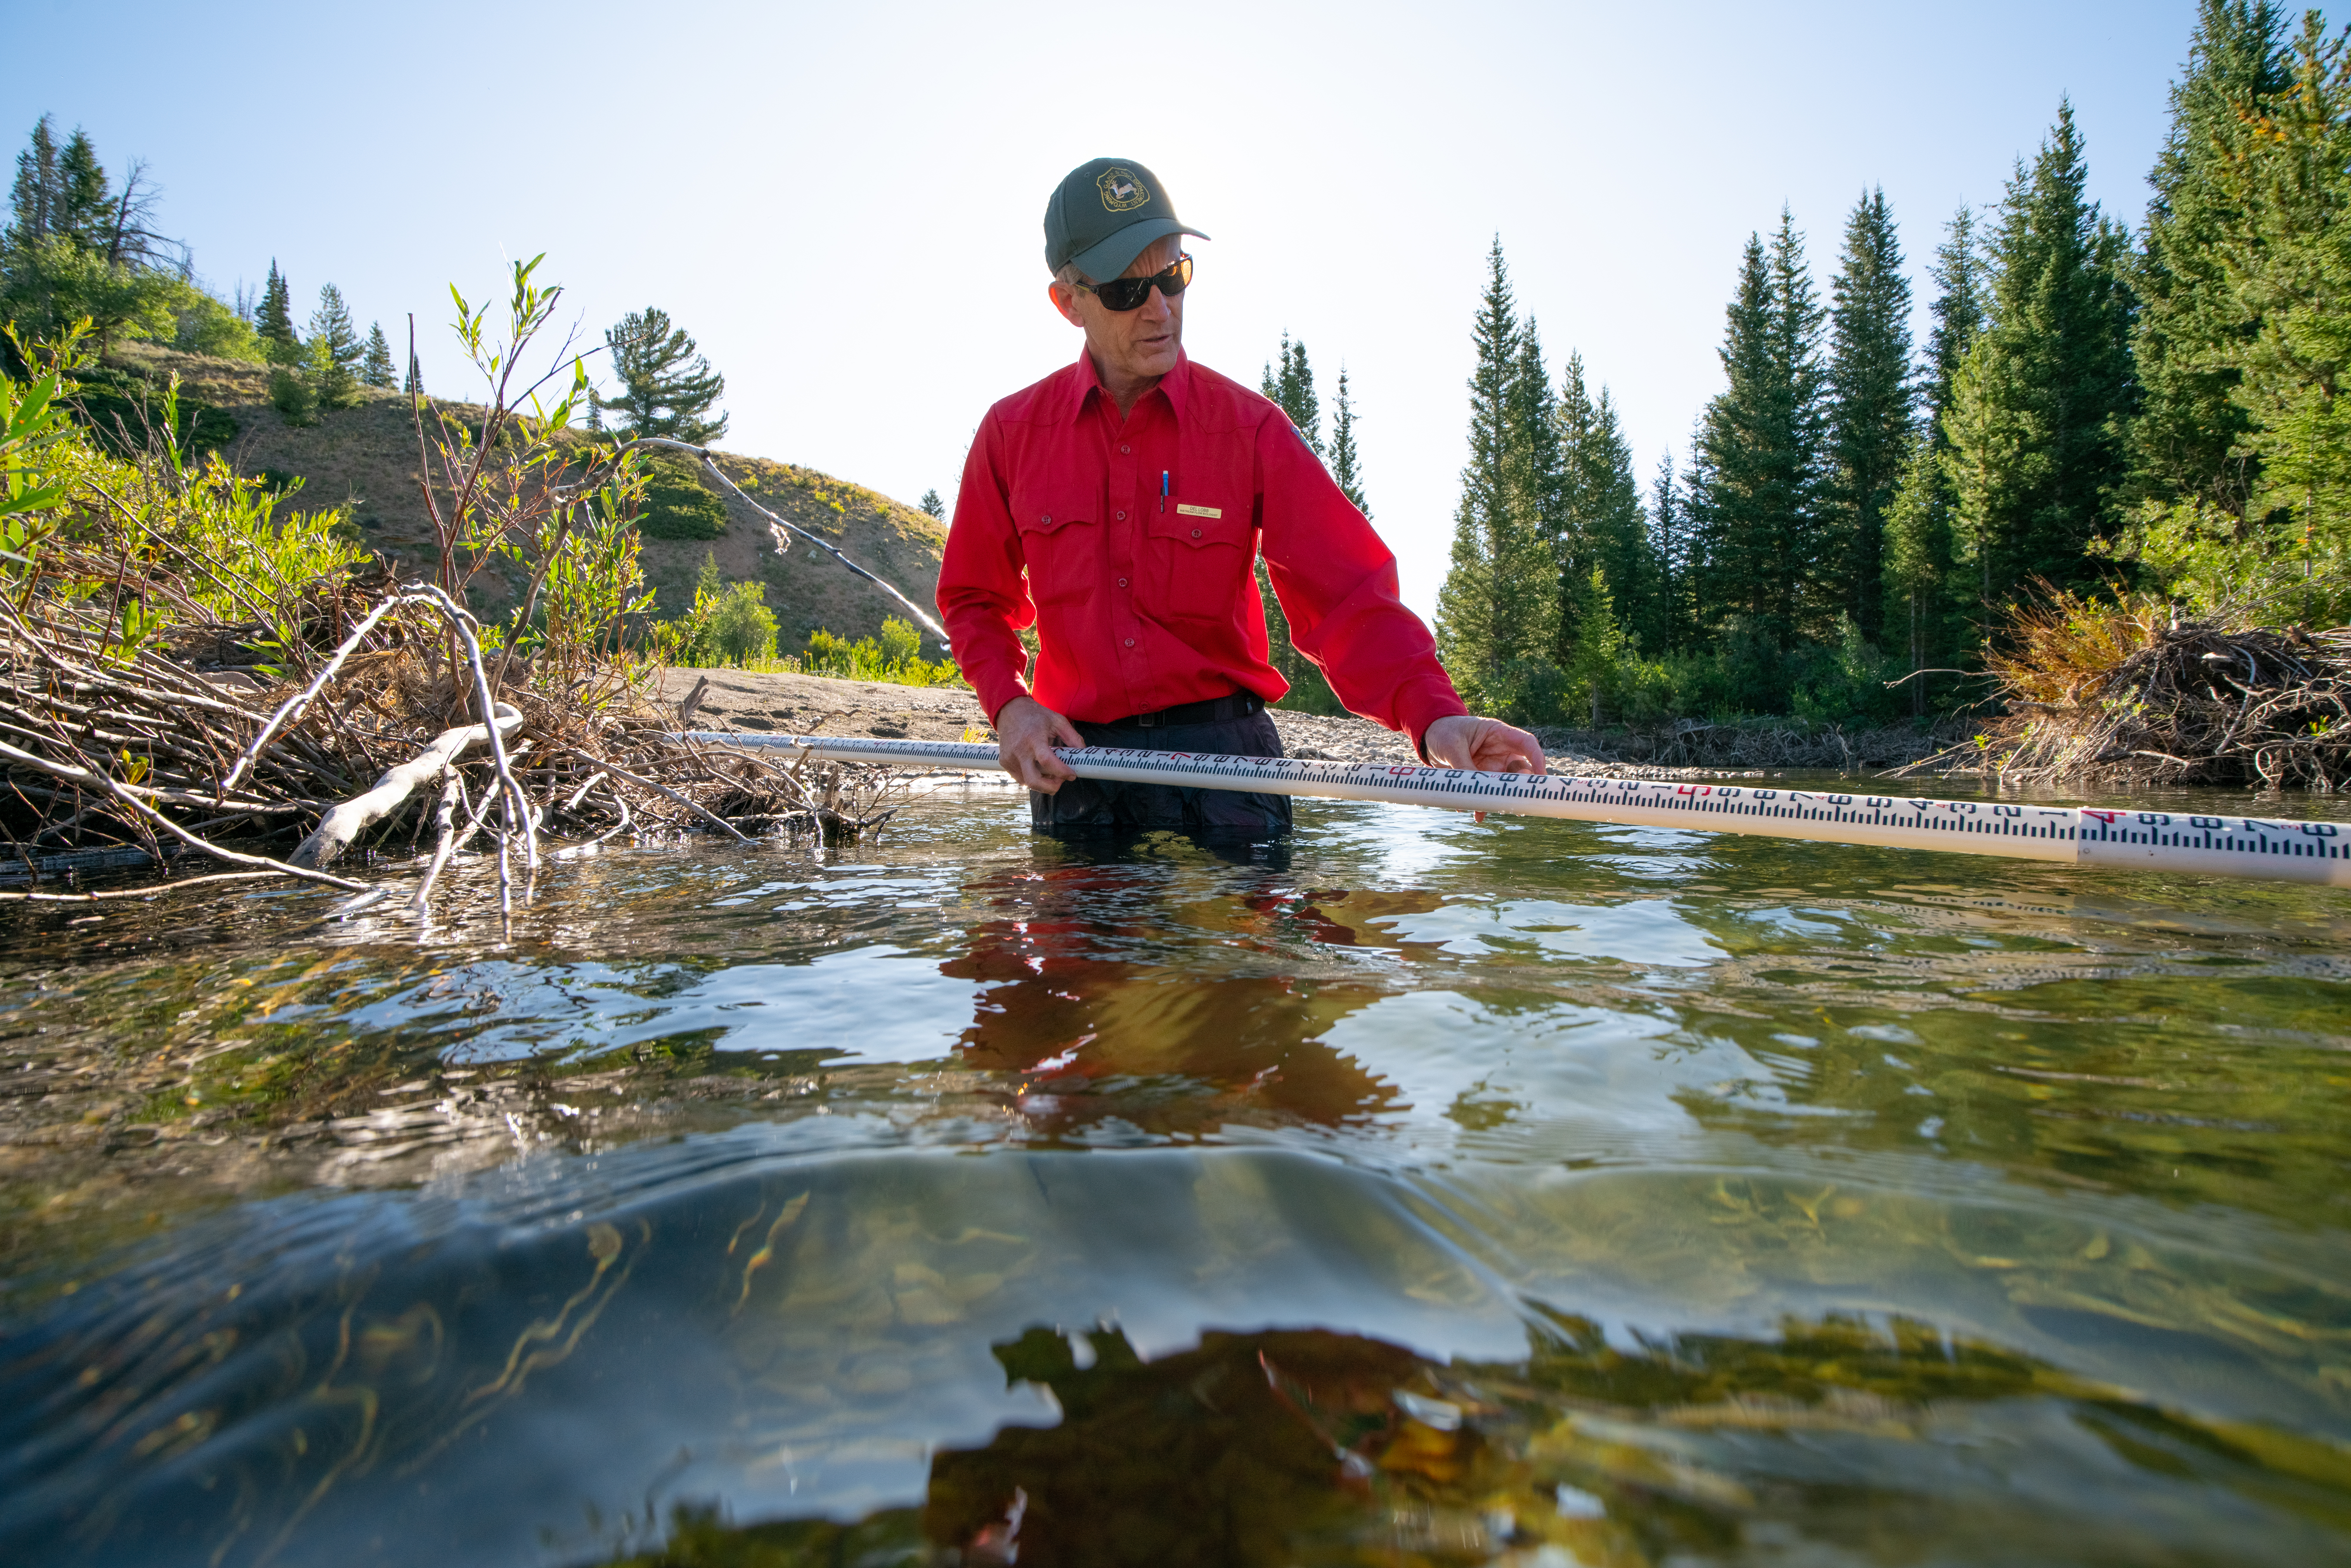 Game and Fish proposes five instream flow water rights to protect native trout